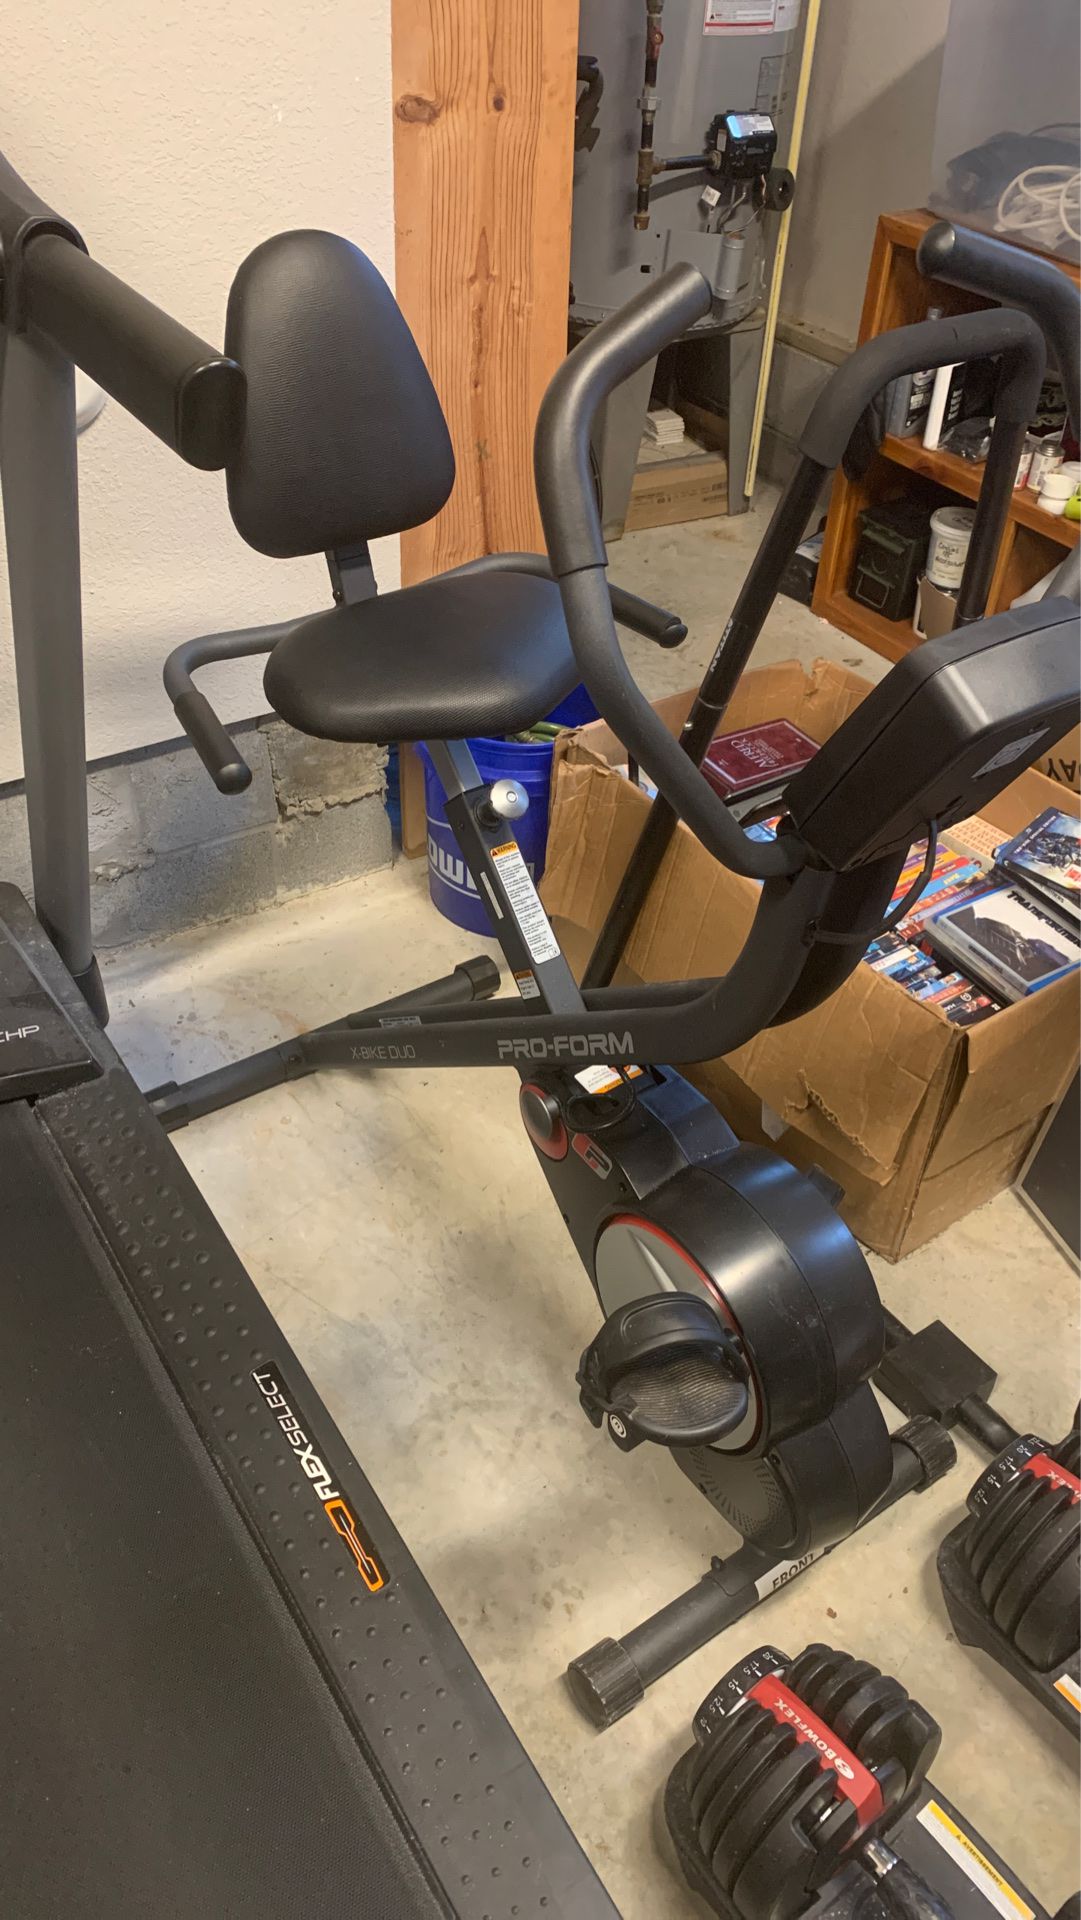 Pro Form duo and ifit adjustable small area stationary bike